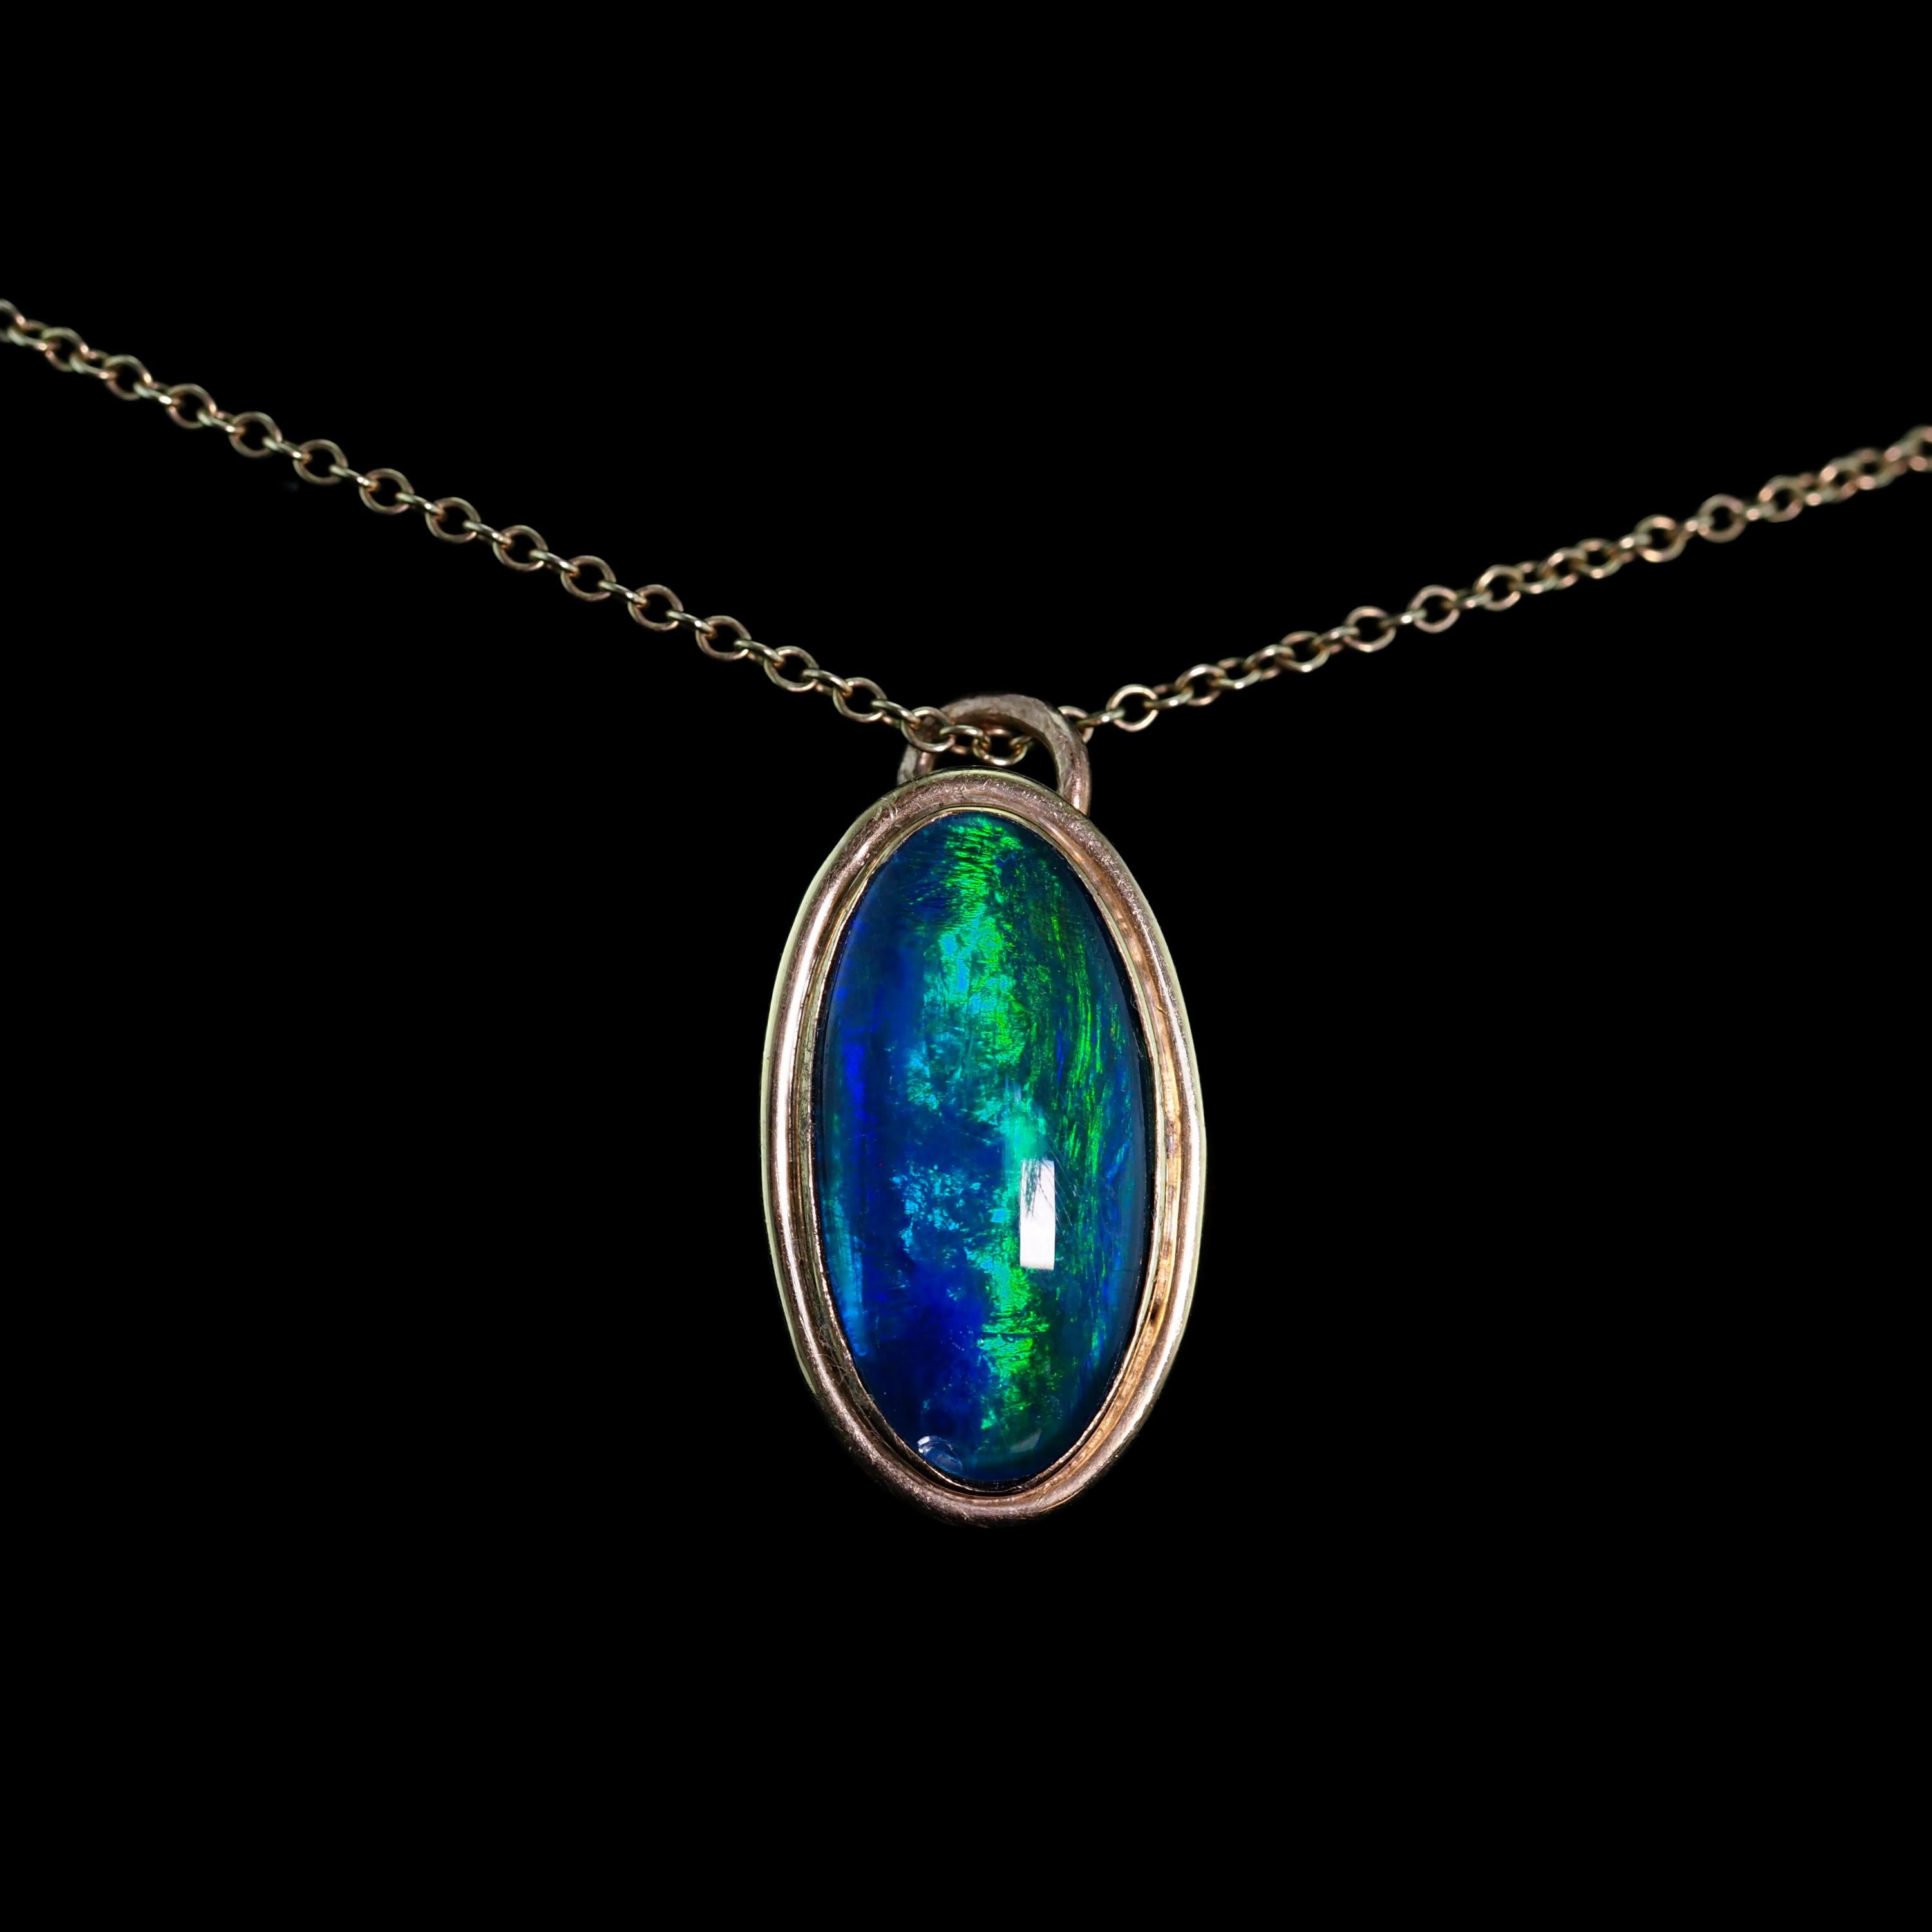 9K Gold Blue/Green Ammolite Pendant & Chain Necklace For Sale 6